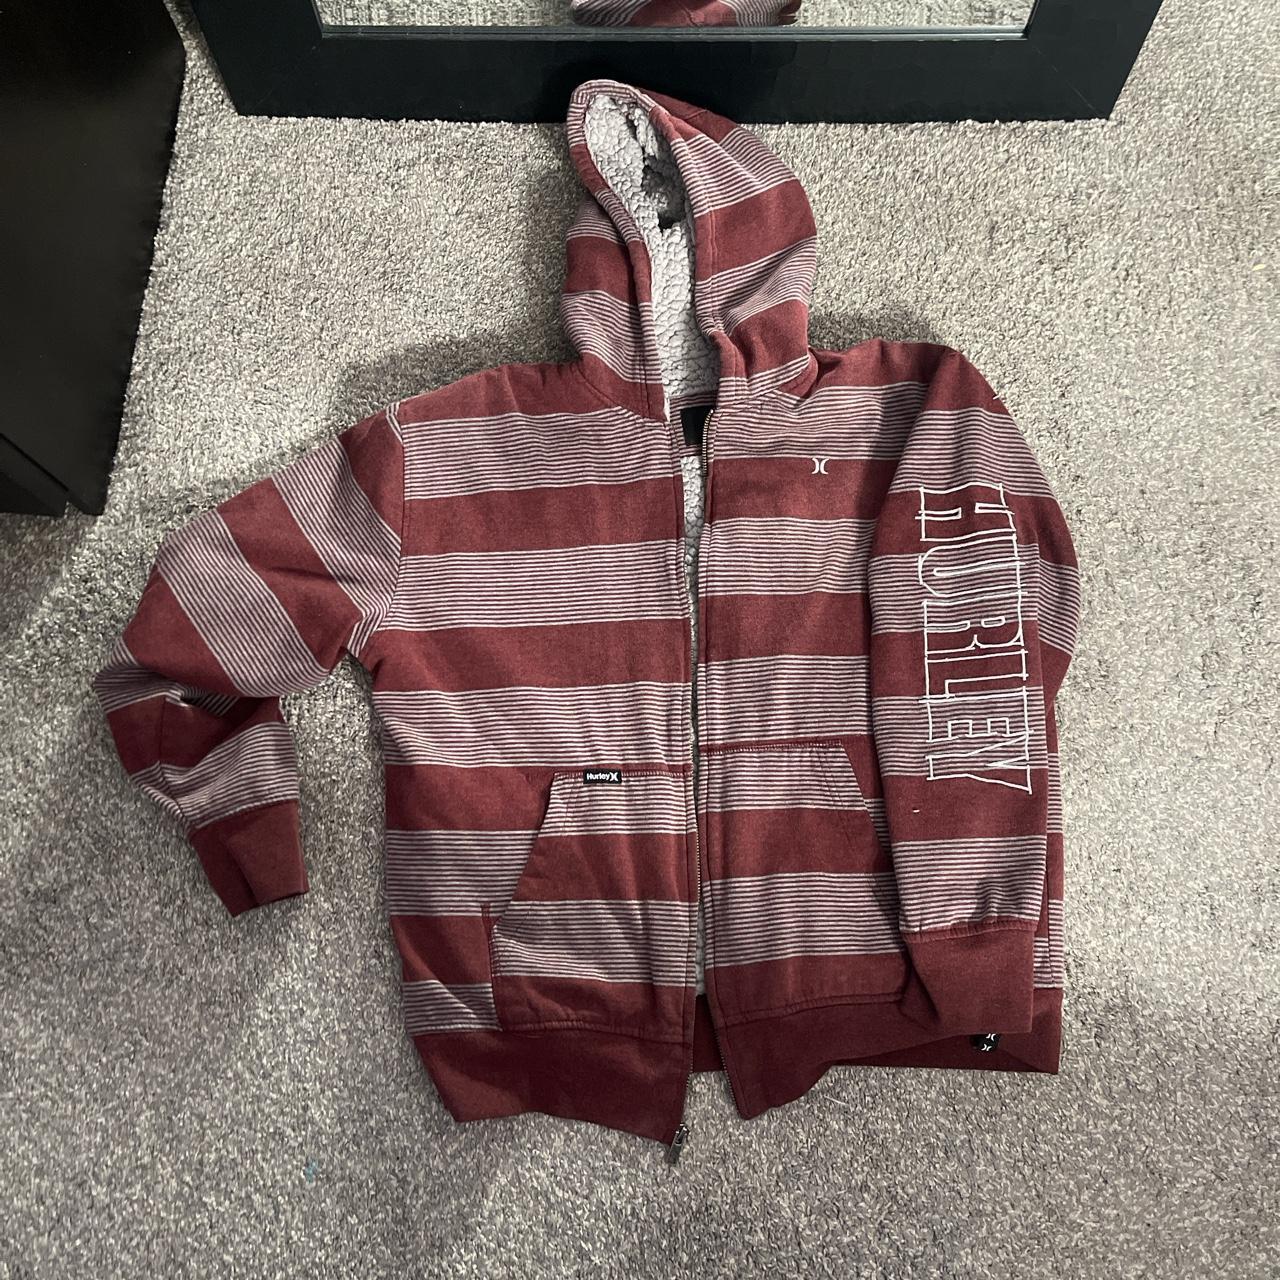 Vintage striped hurley zip up tagged xl fits like a... - Depop